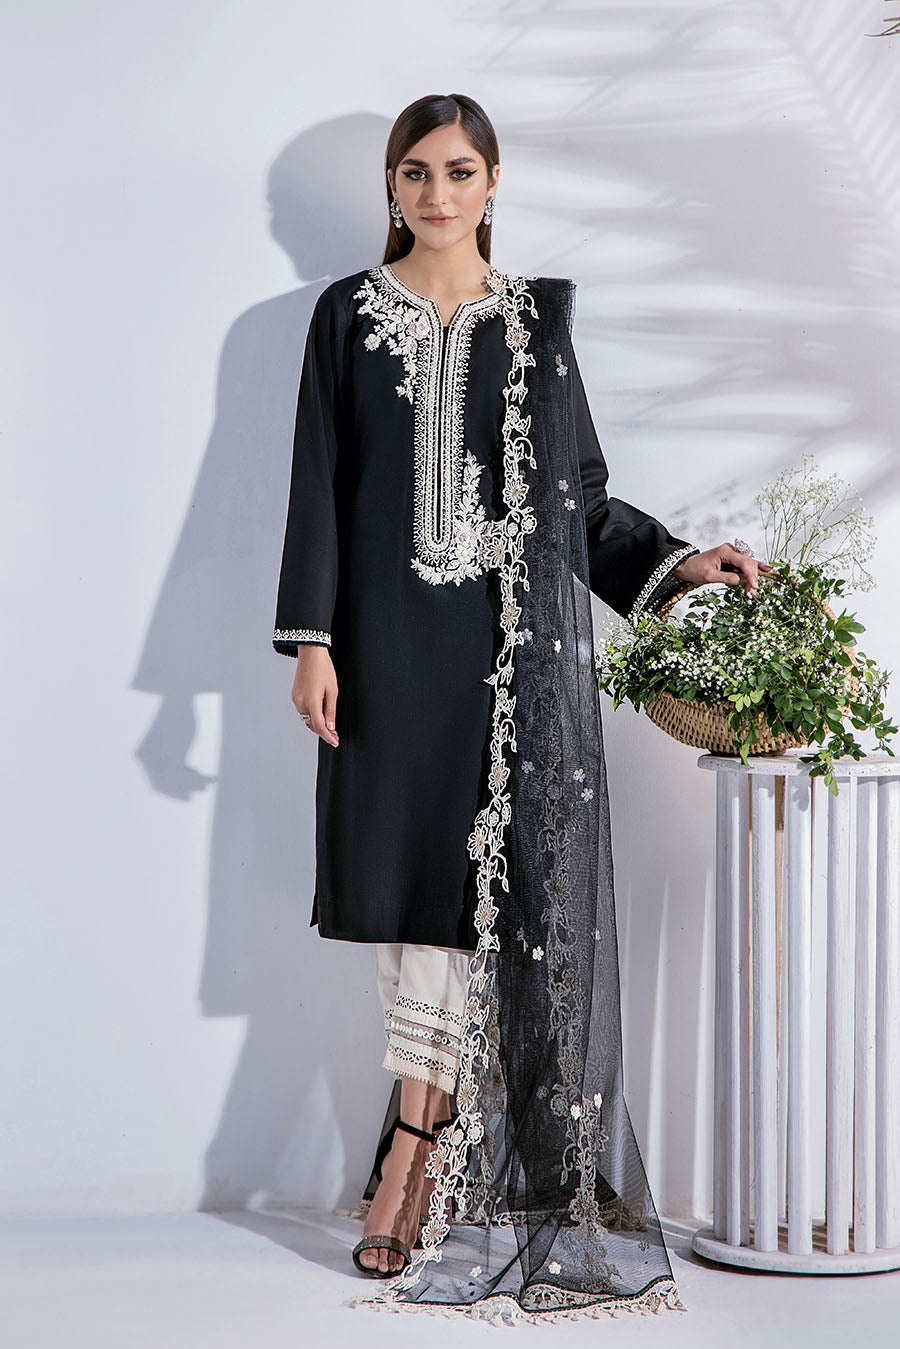 Classic Black Beauty: Cotton Embroidered Shirt with Net Dupatta.